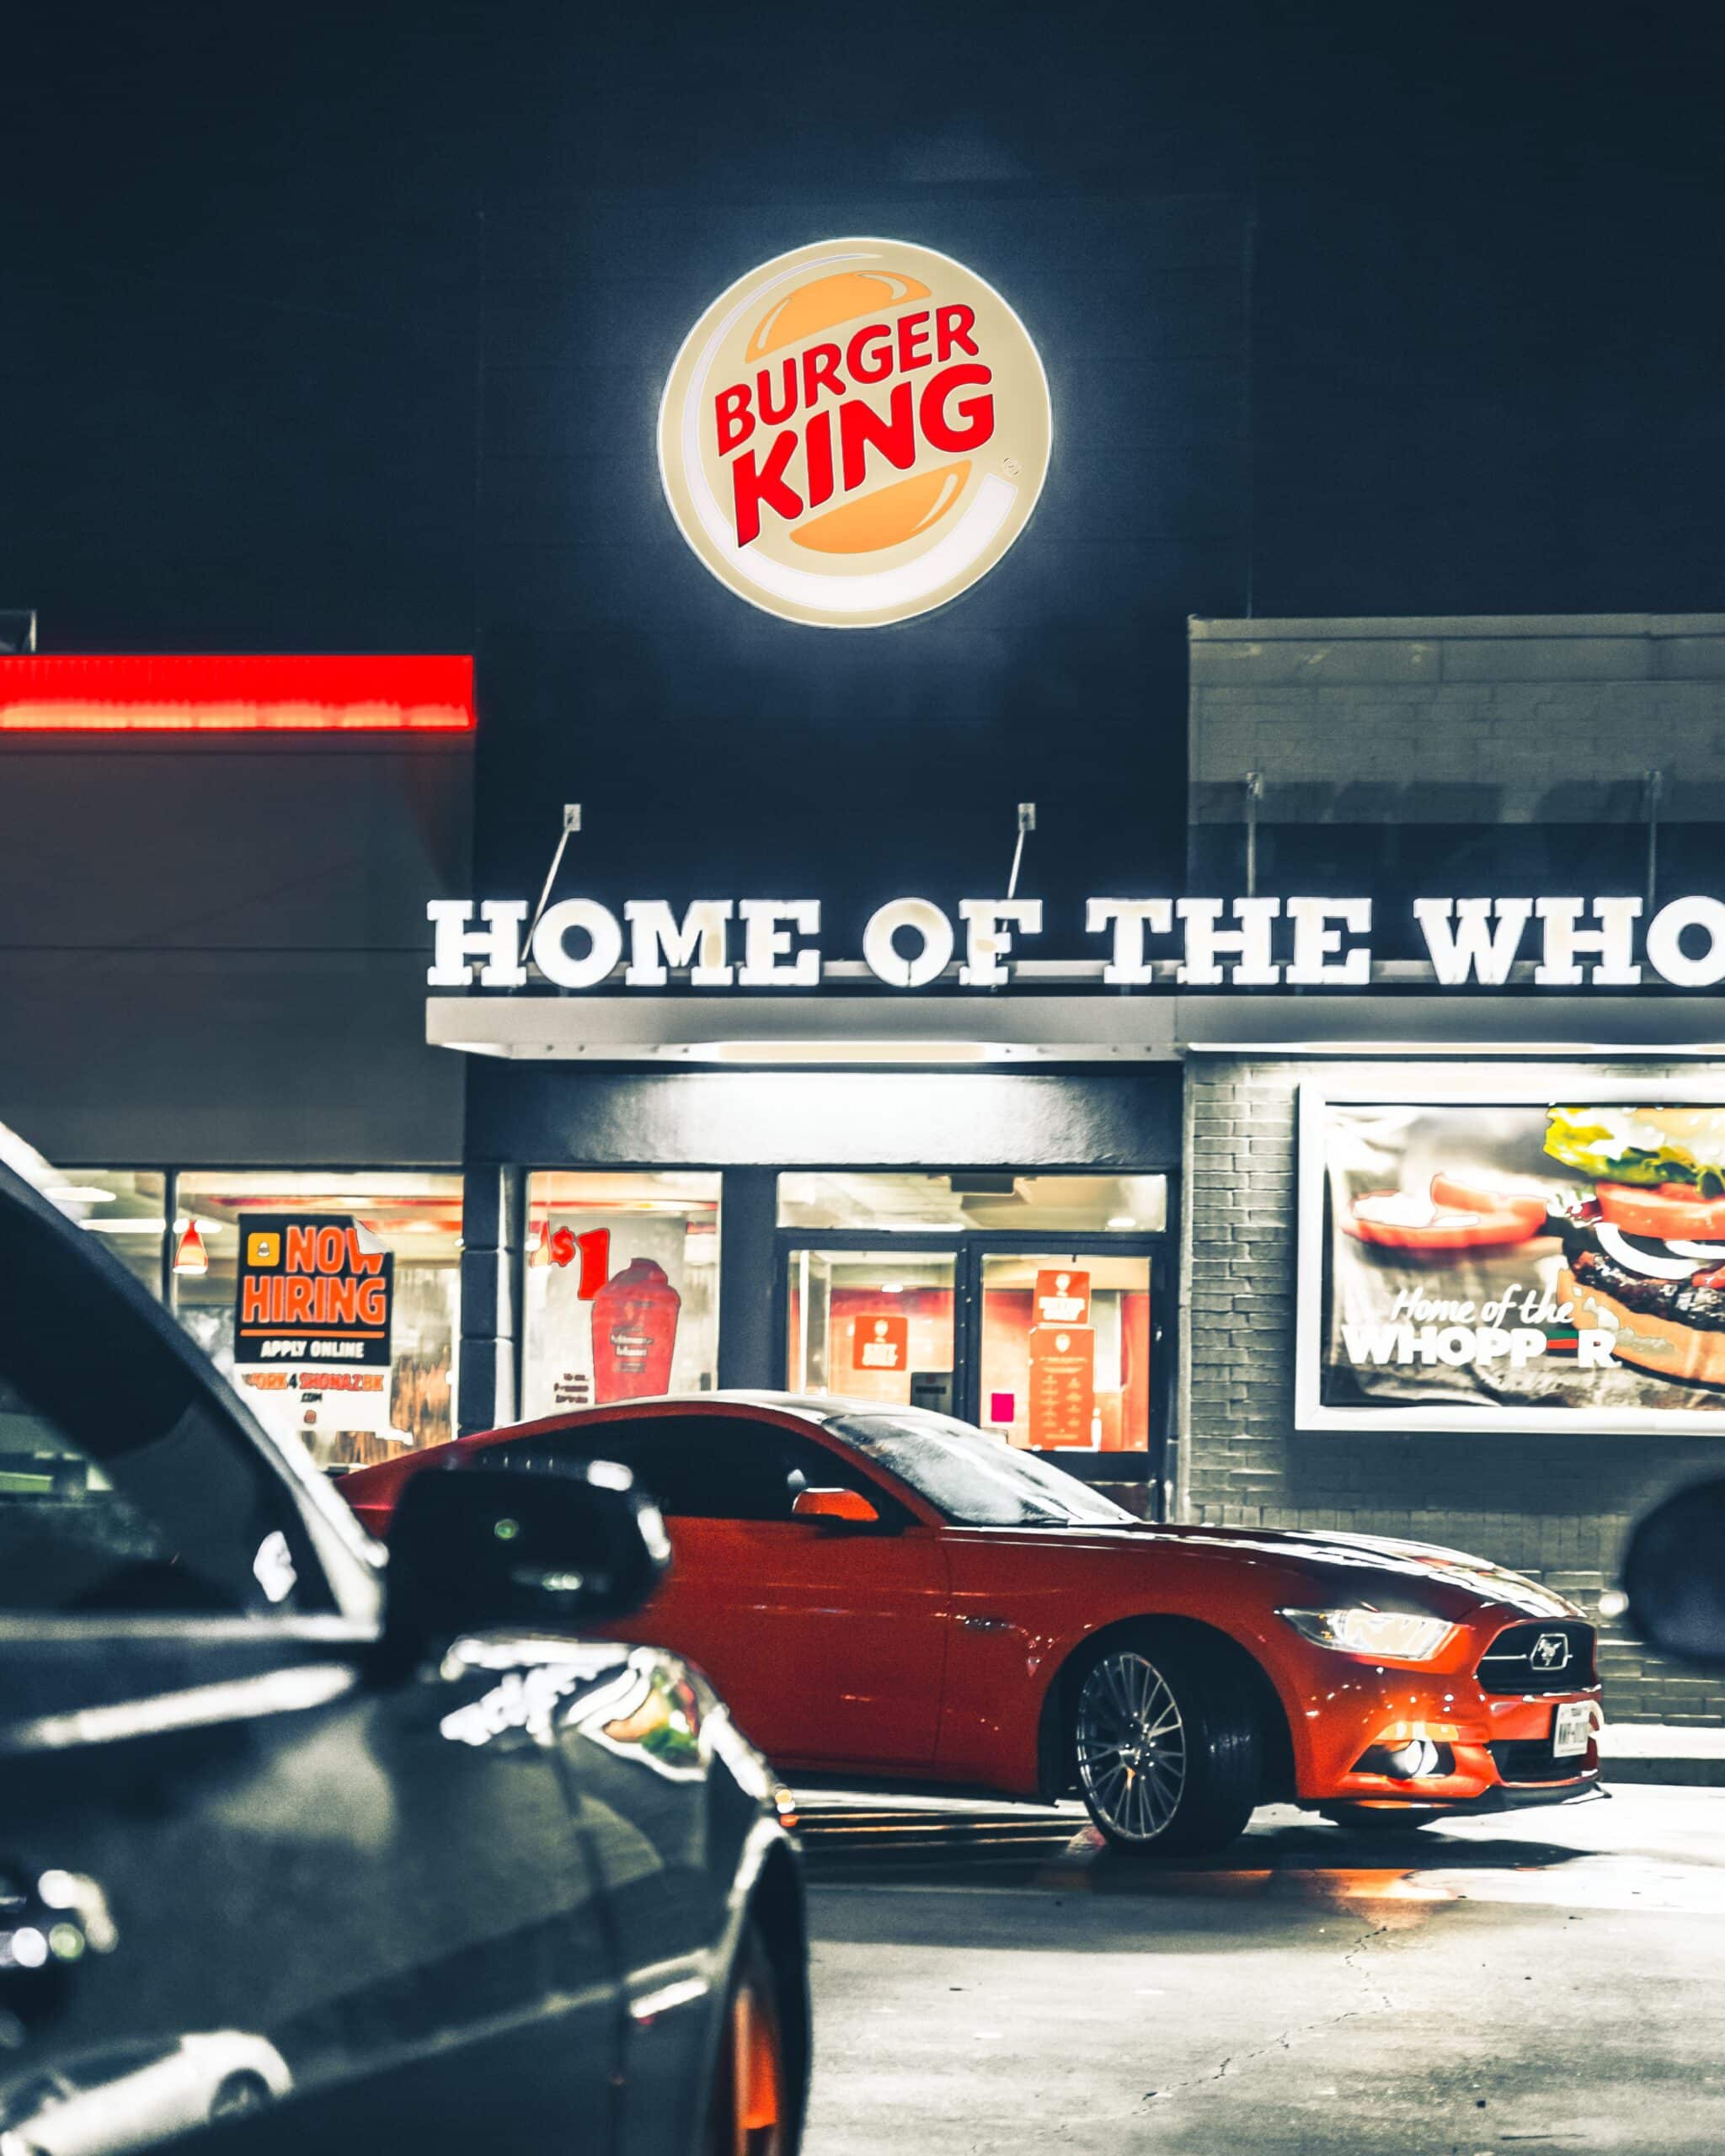 Can Burger King Reclaim the Flame? 1